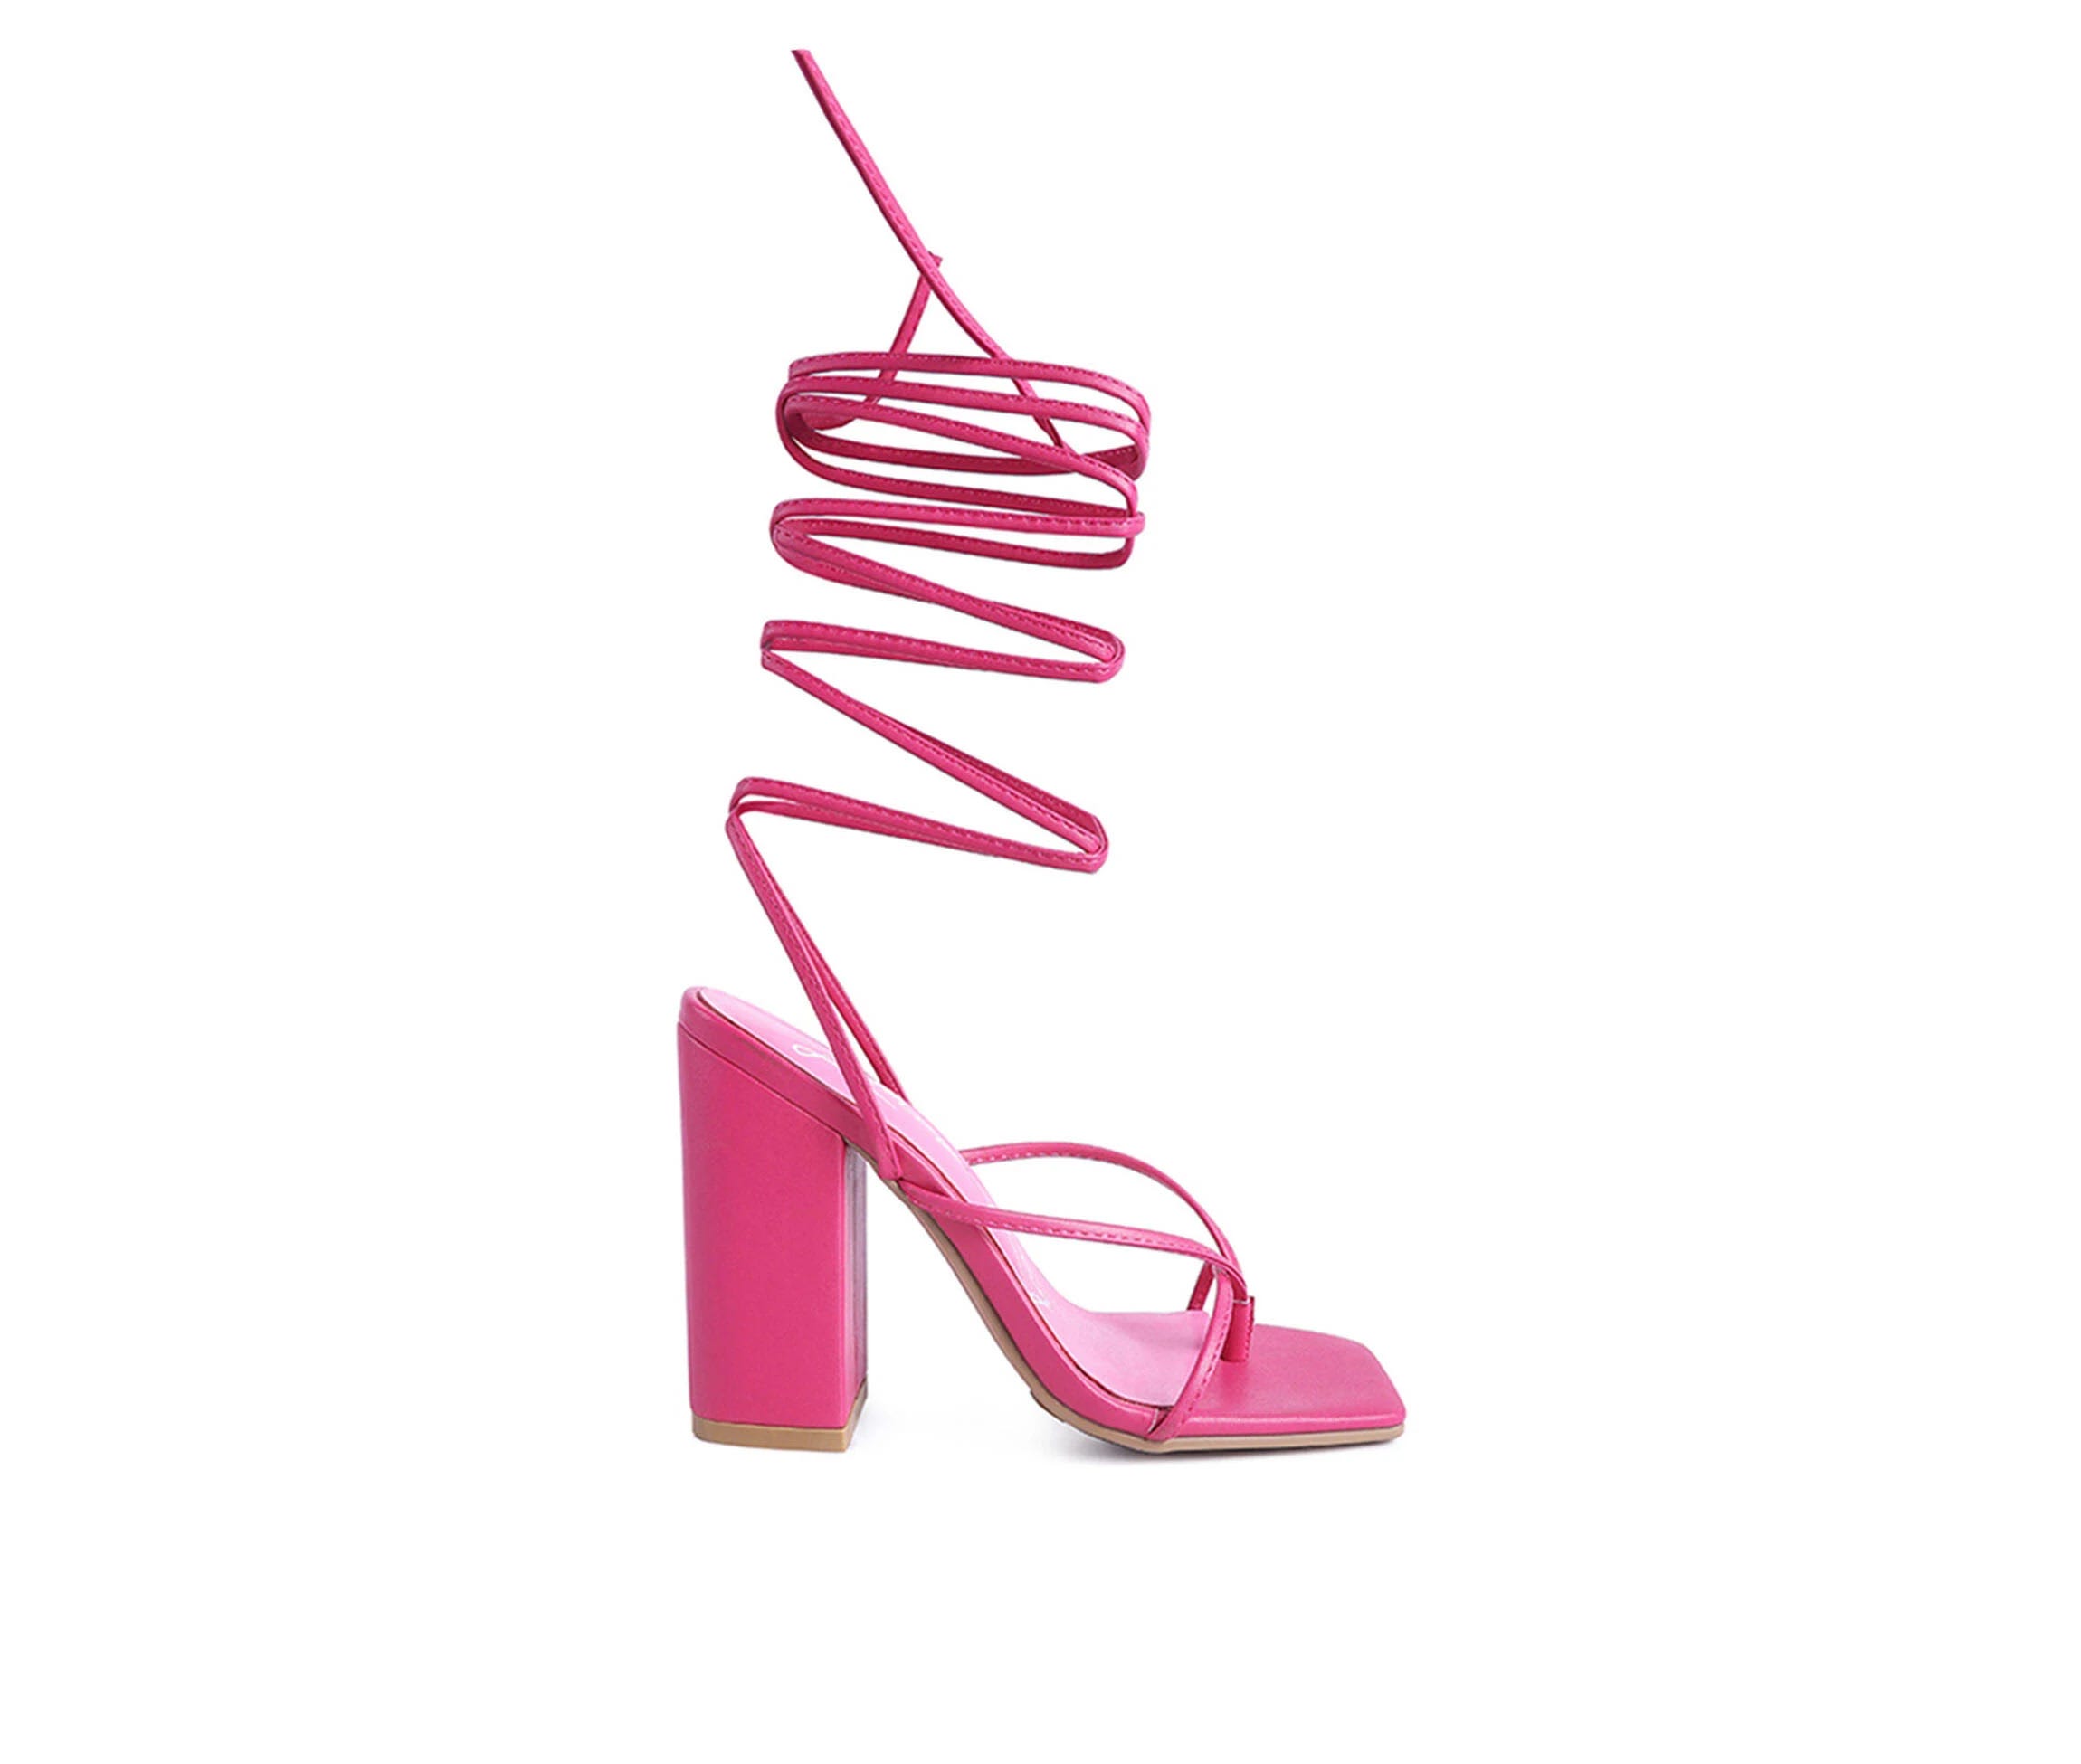 Fuchsia Lace-Up Block Heel Tie Up Sandals with Faux Leather Upper | Image